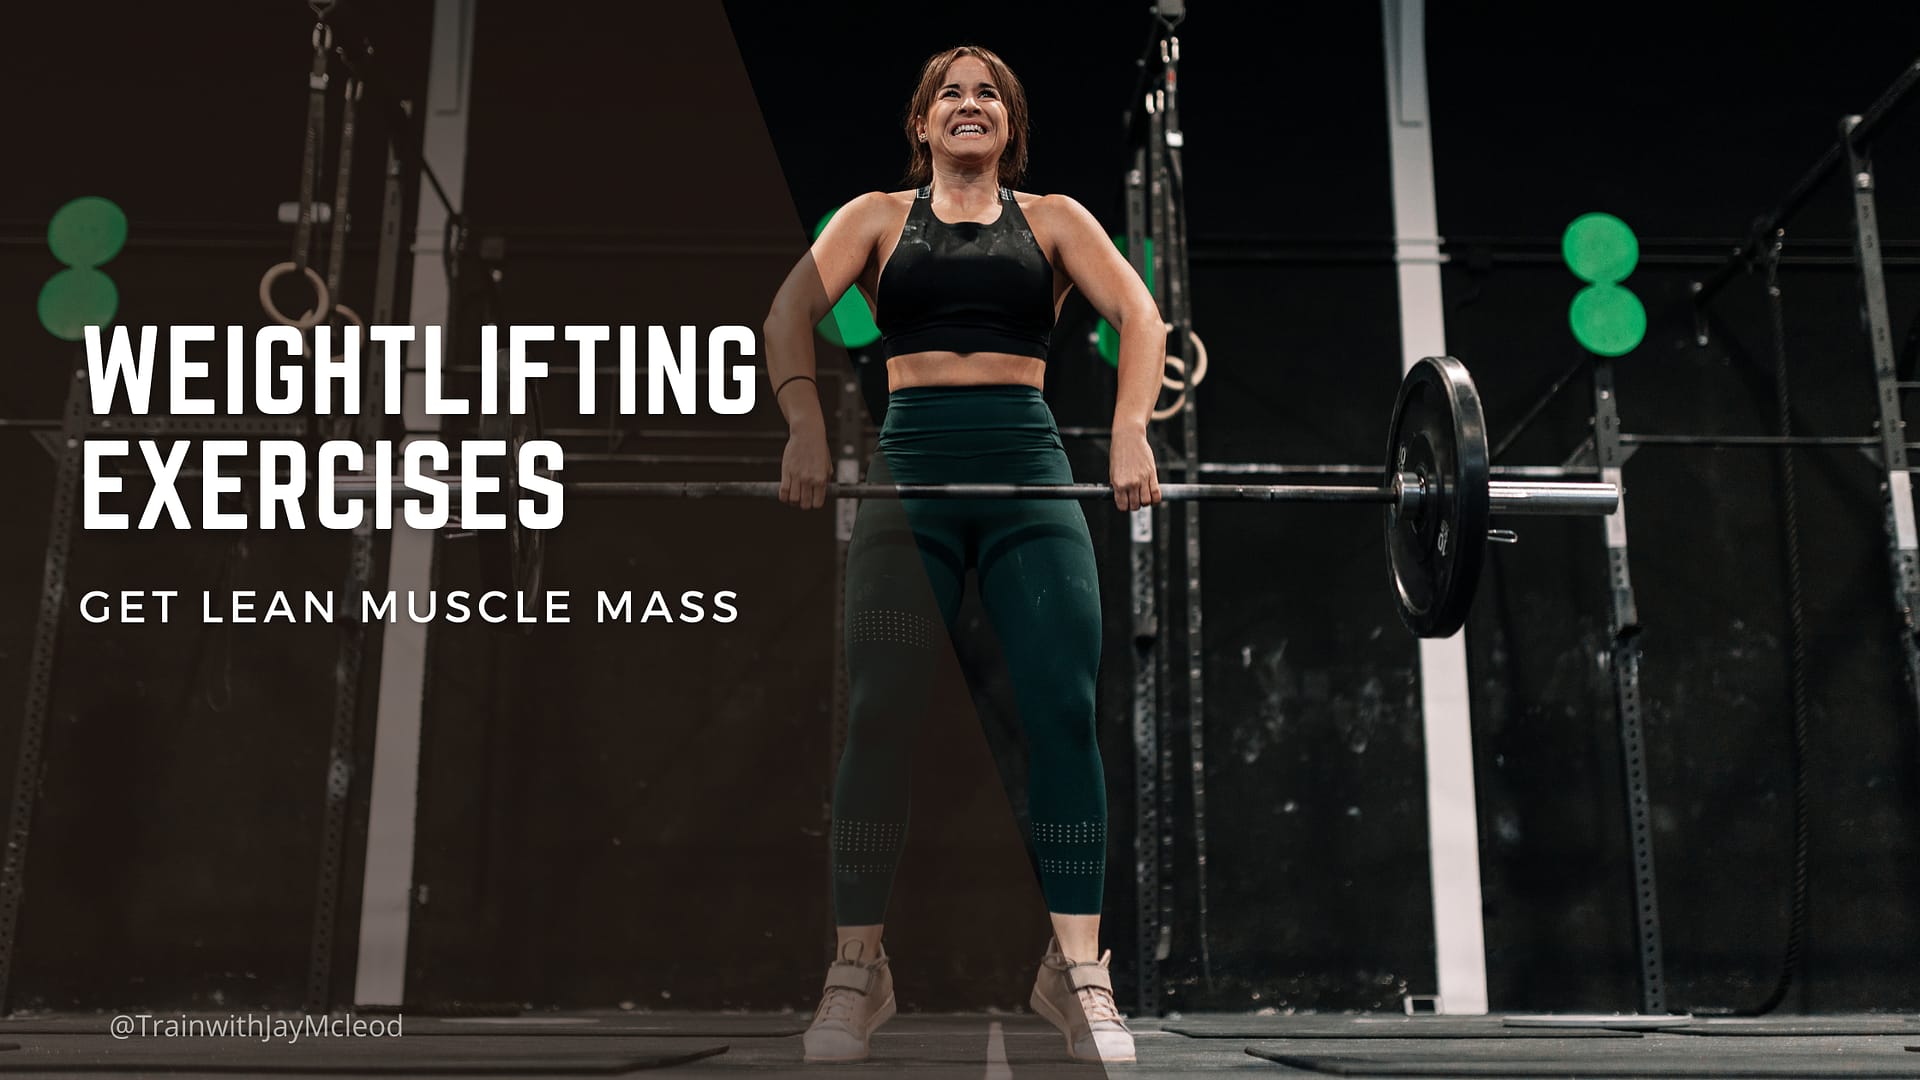 5 Weightlifting Exercises| Personal Training in Bel Air, California